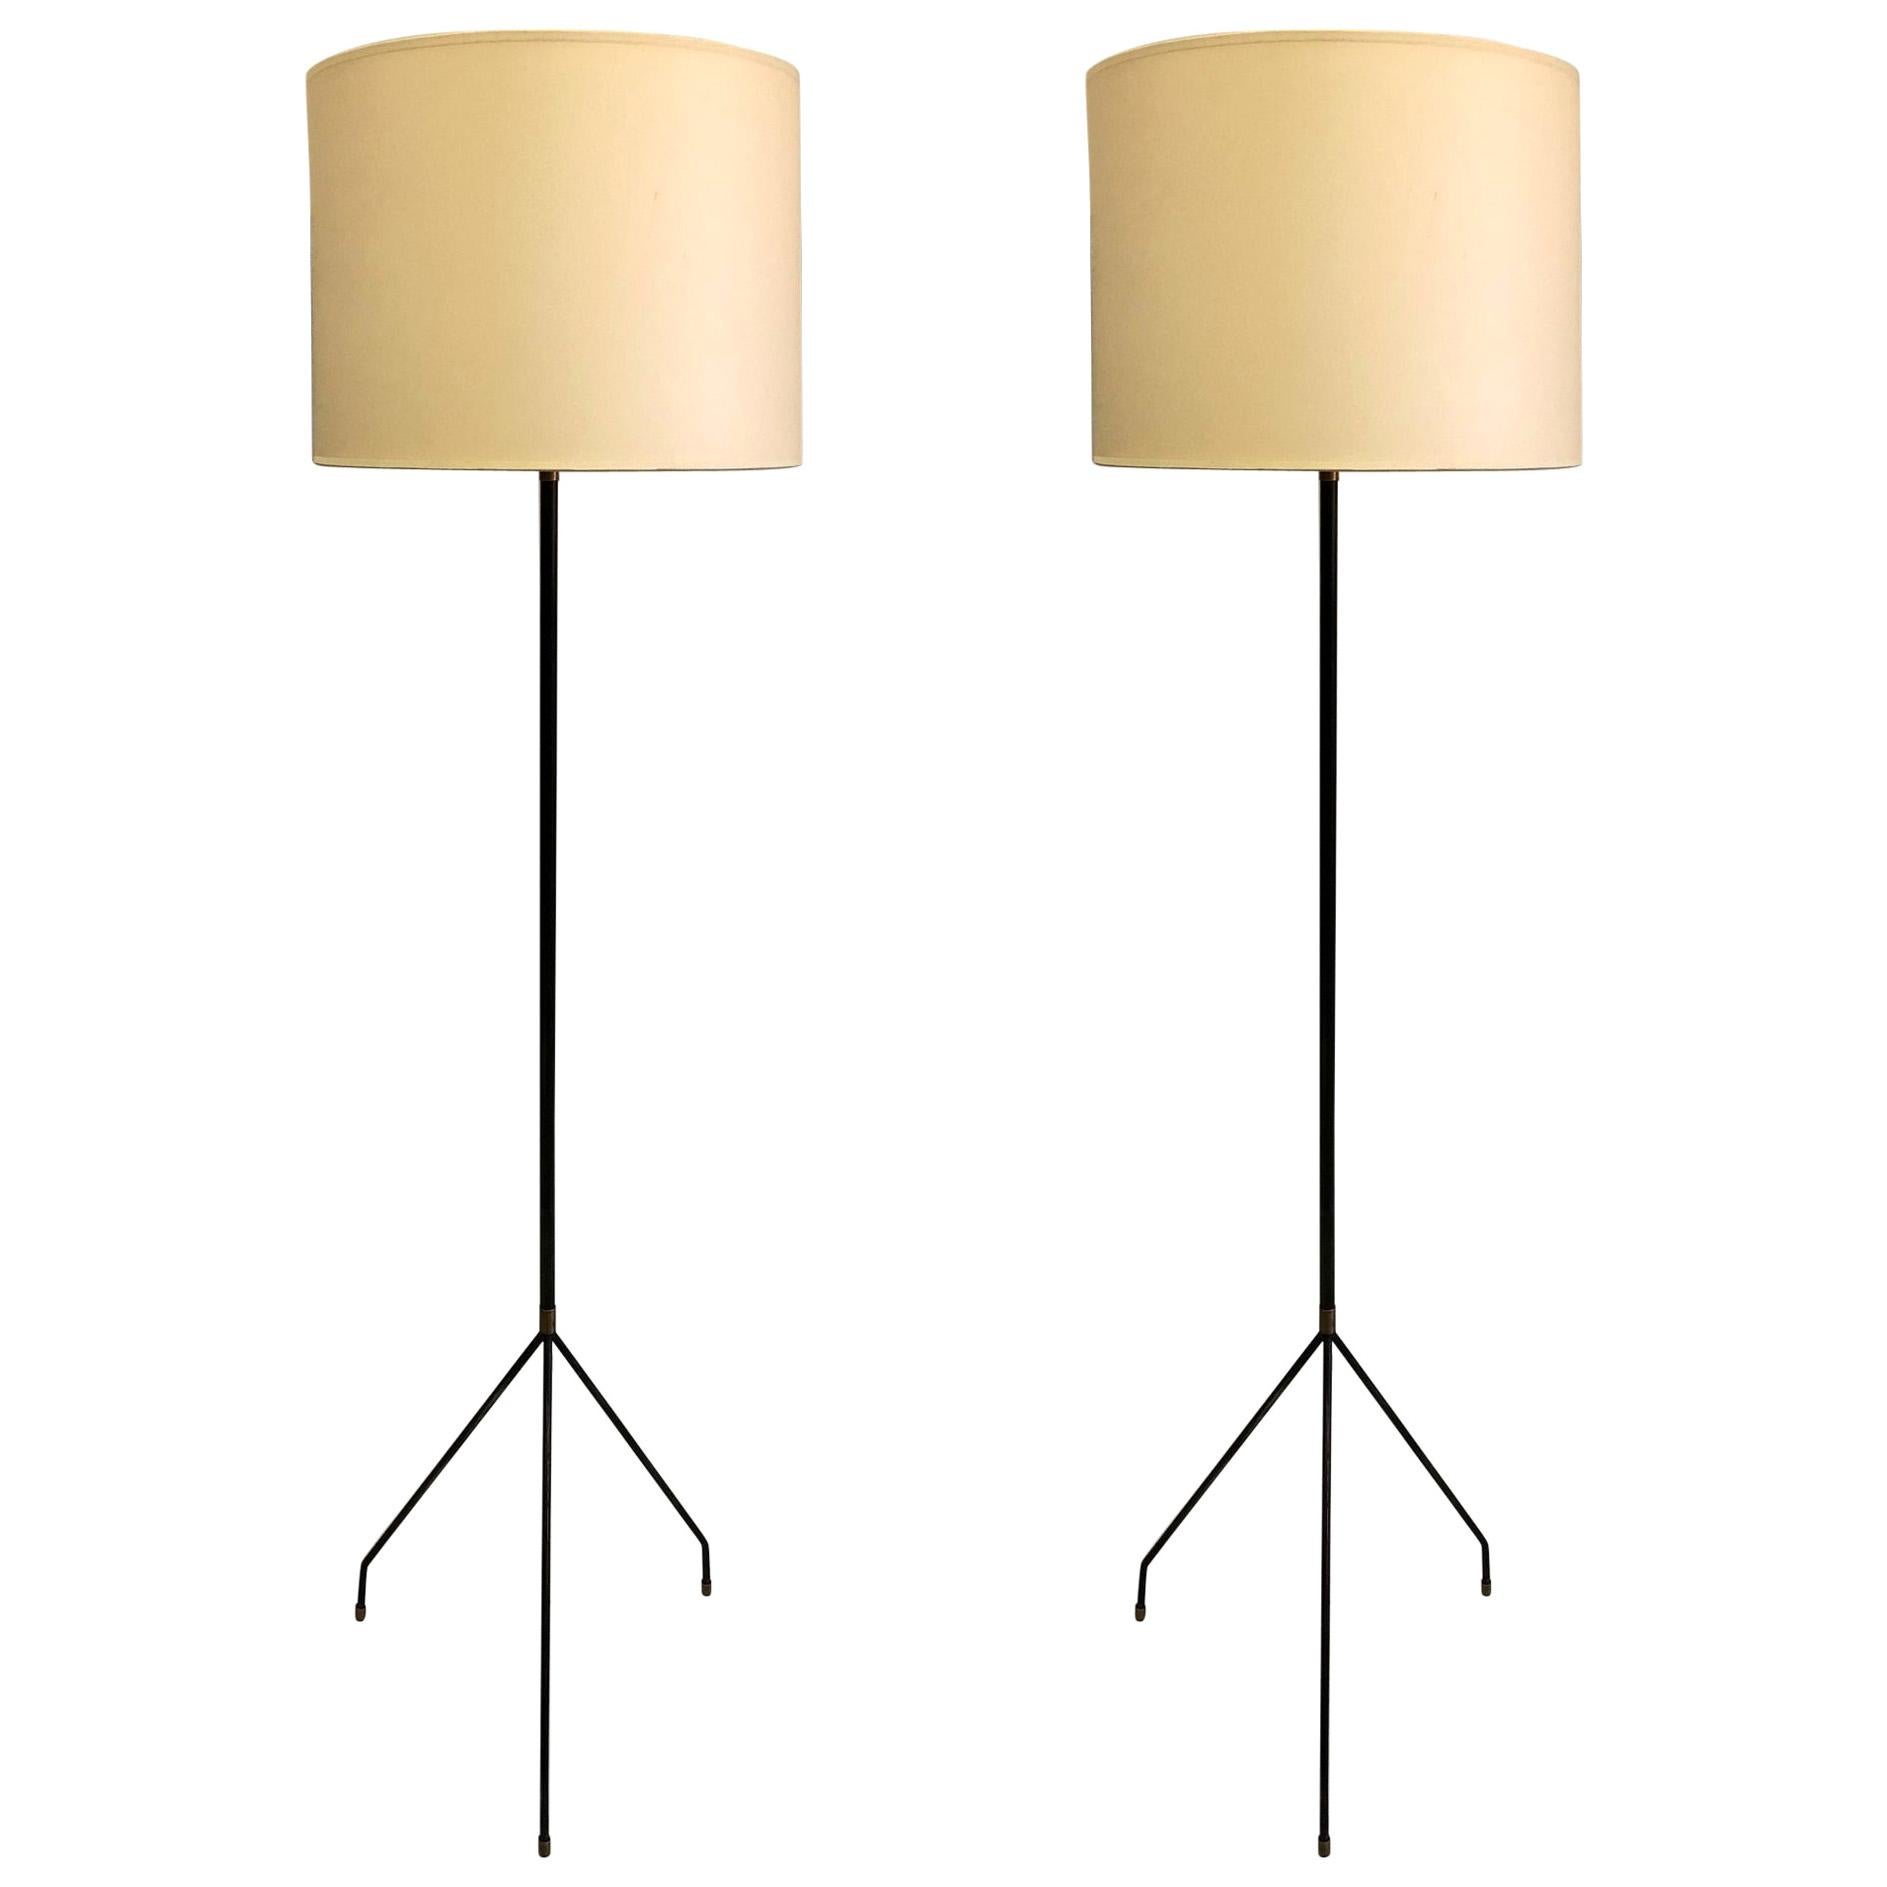 Pair of French Mid-Century Modern / Minimalist Iron Floor Lamps, Pierre Guariche